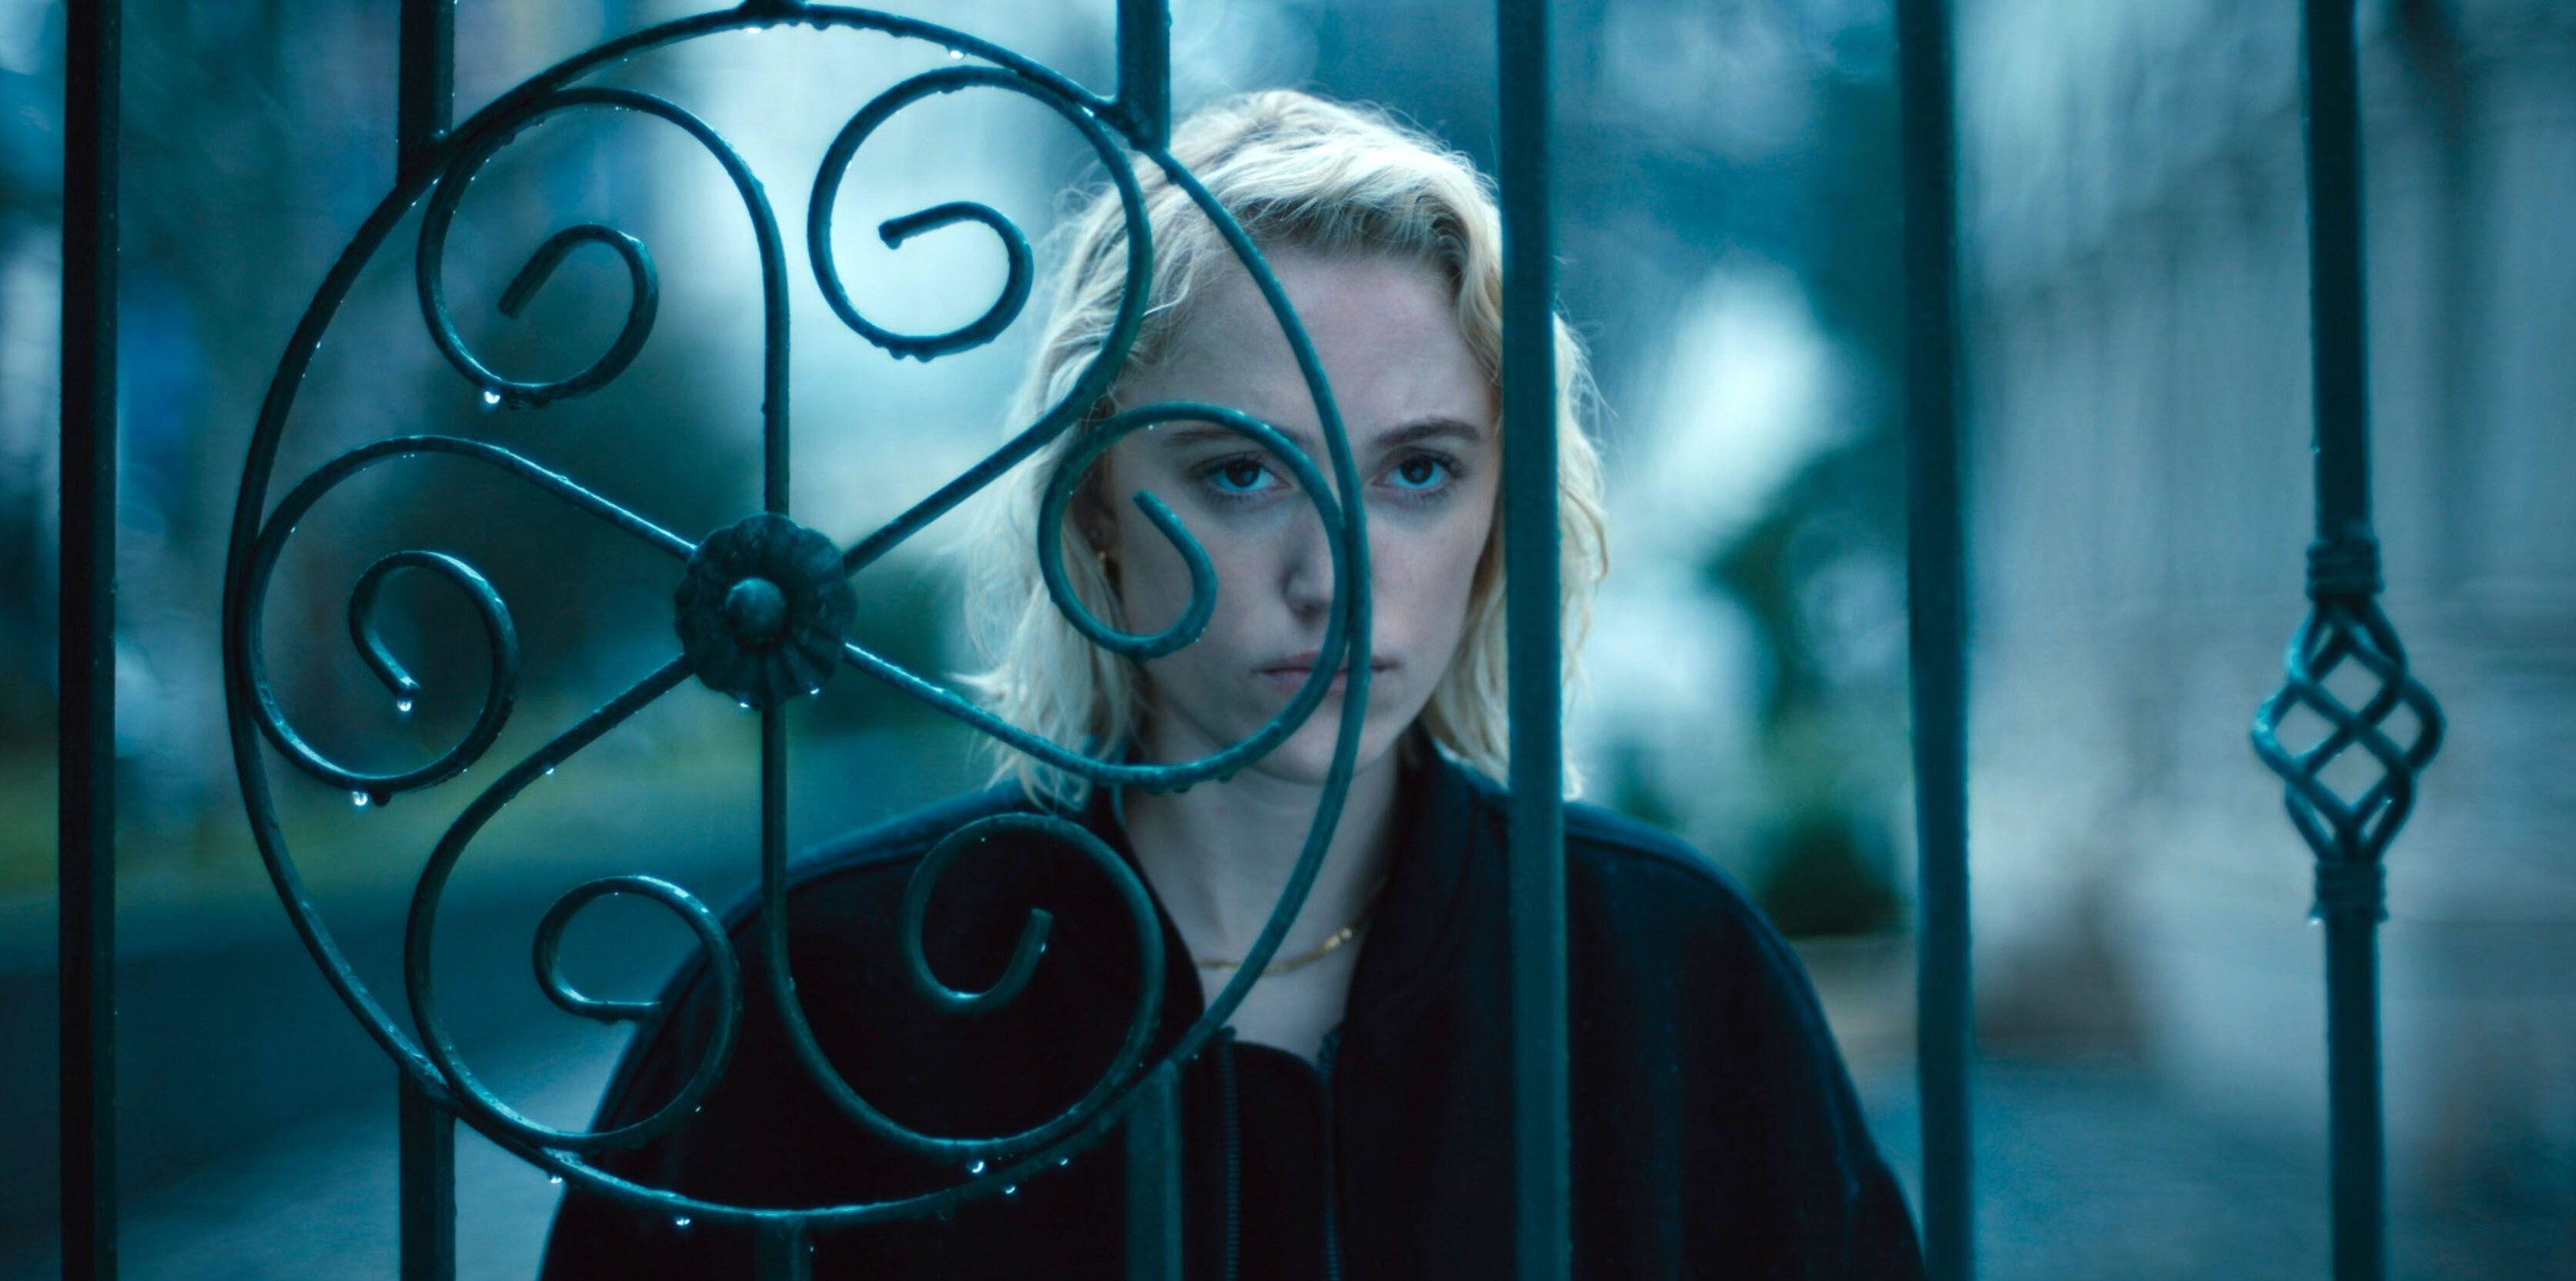 A young blonde woman stares at a stranger through an intricately designed fence in “Watcher”